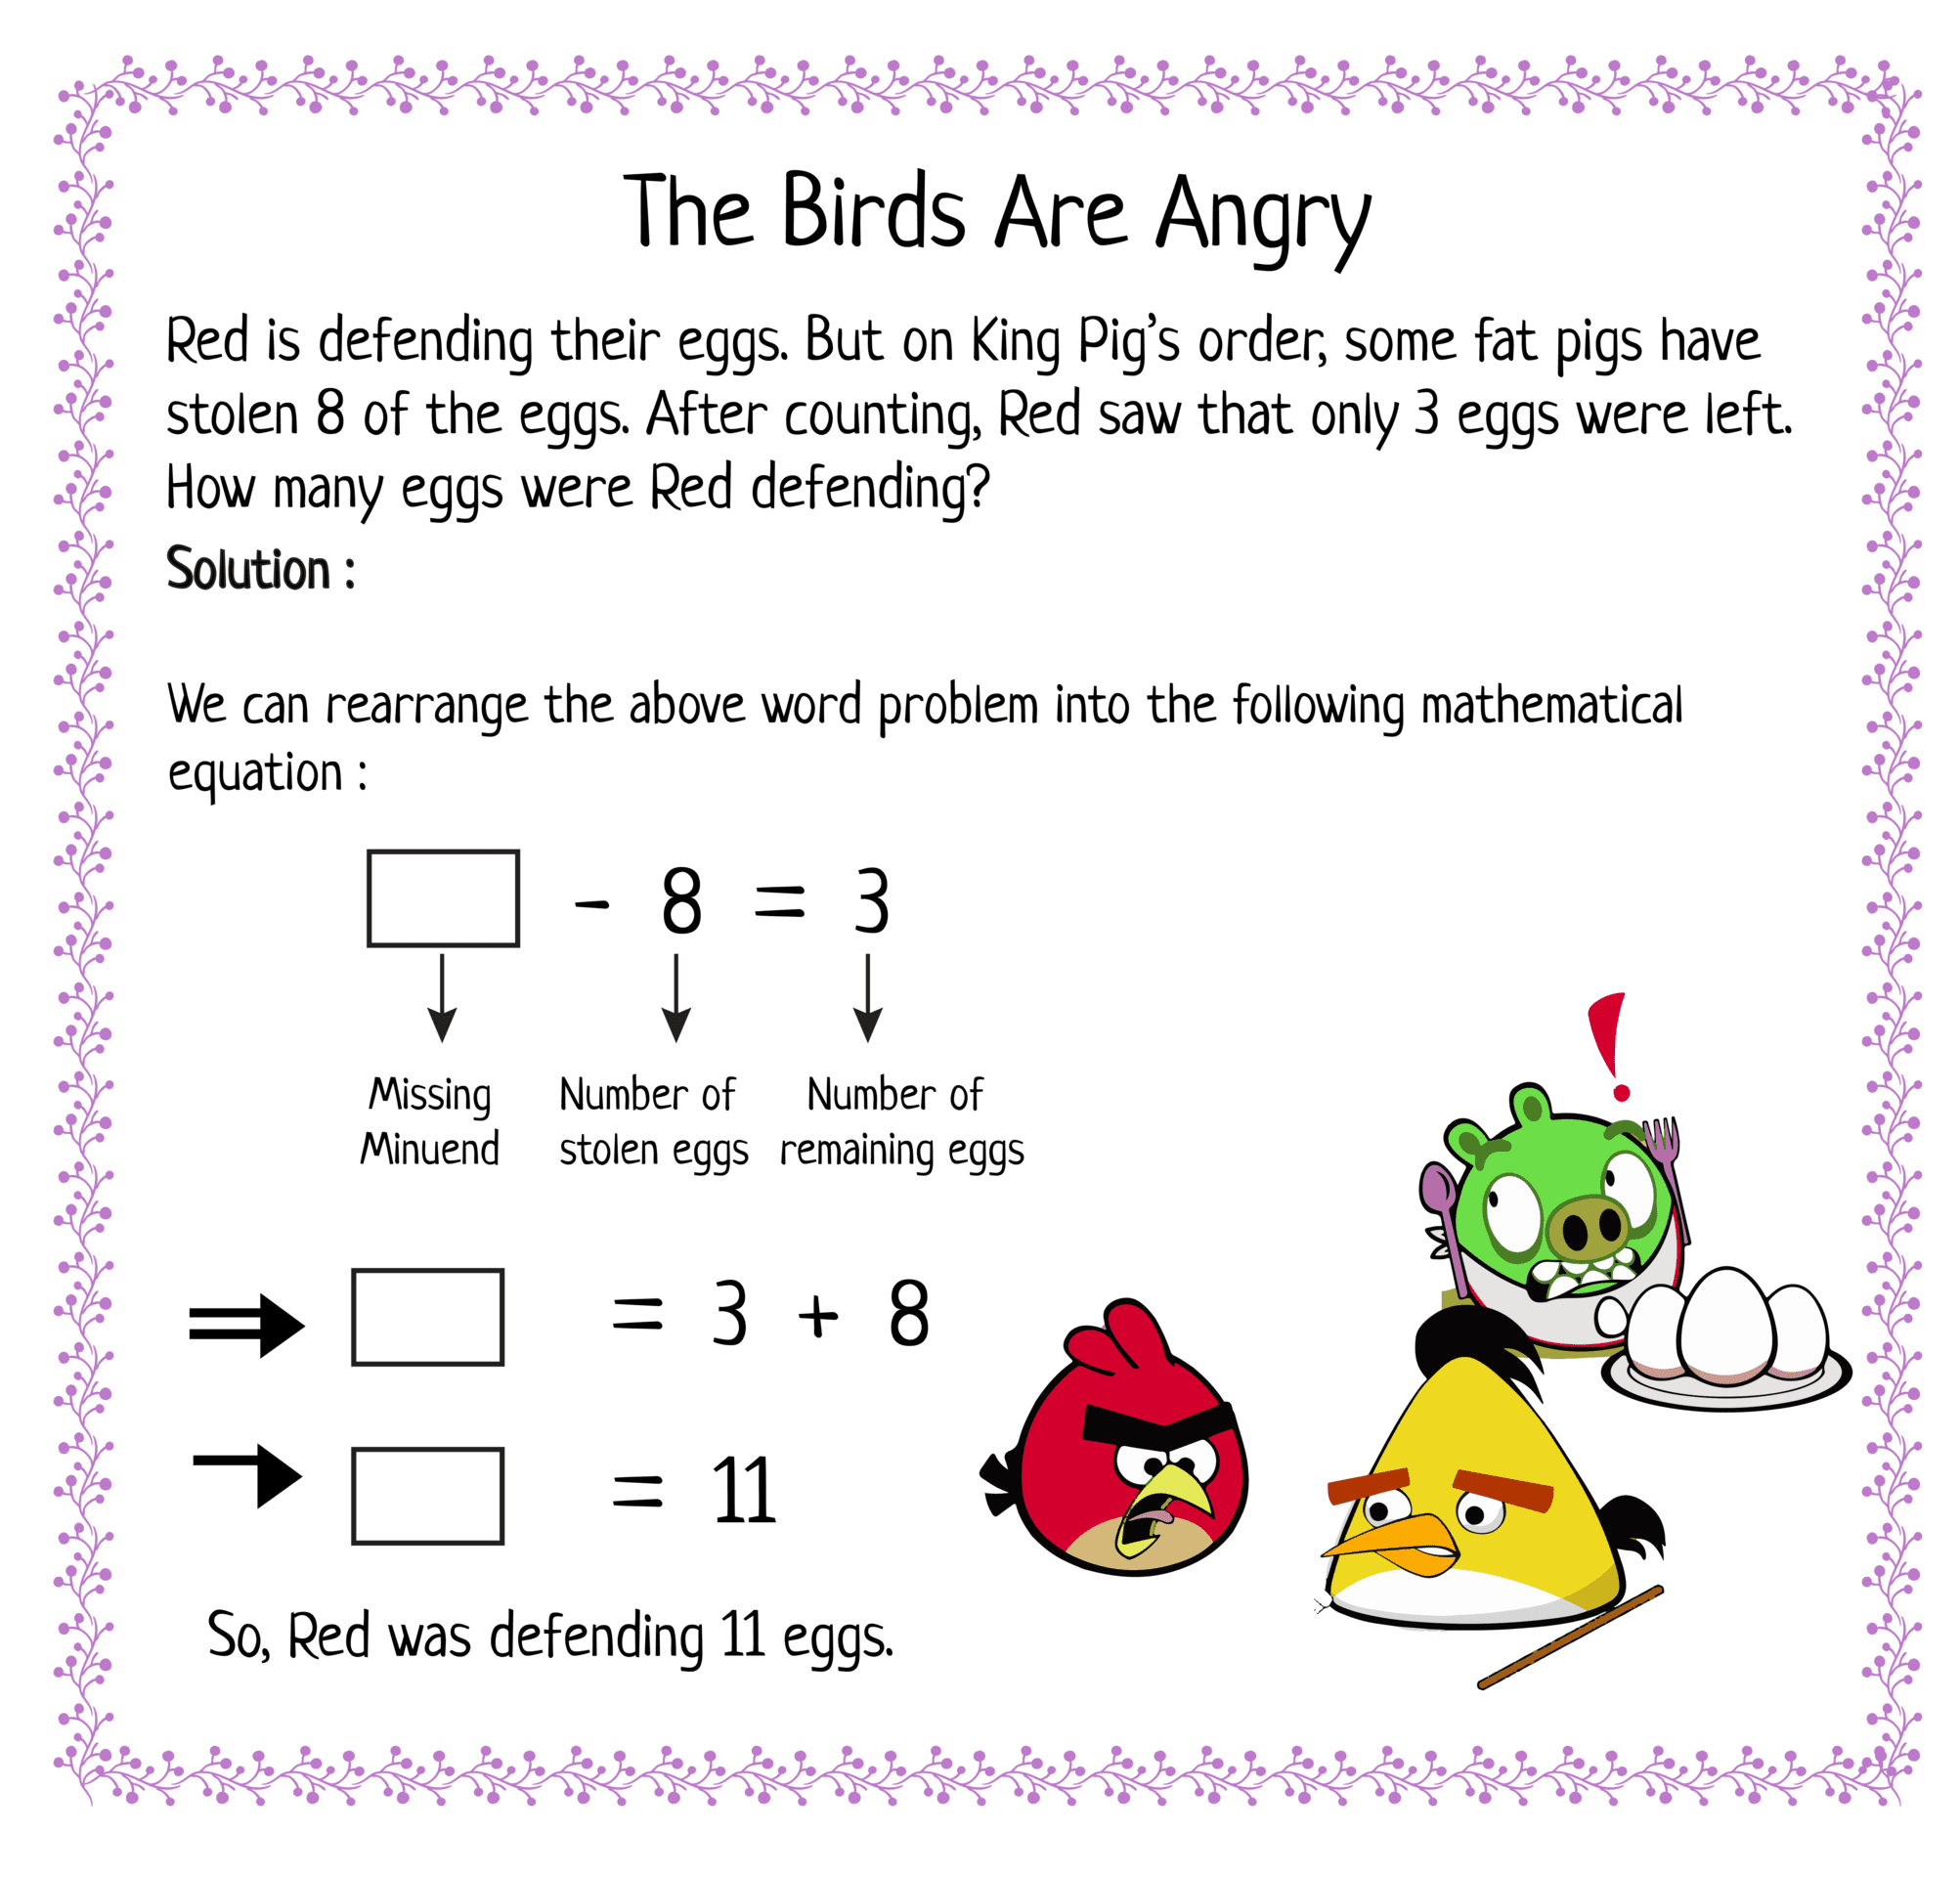 Helping Angry Birds to Find Their Eggs Using Missing Minuend